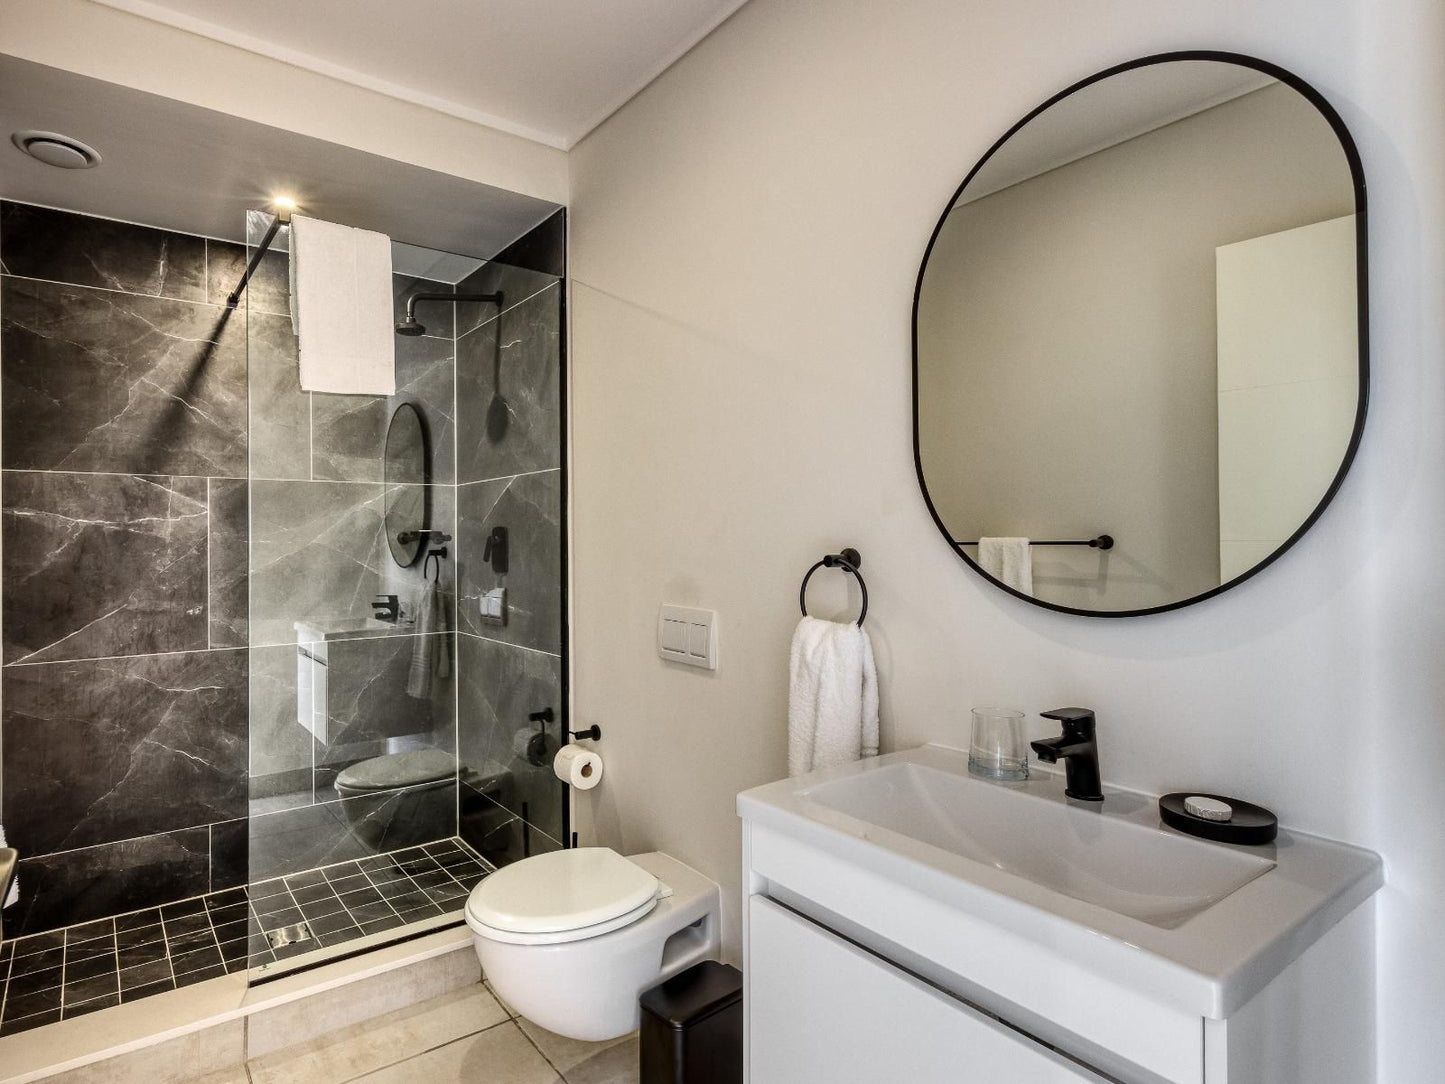 Uniquestay Paardevlei Square 2 Bedroom Apartment Firgrove Rural Somerset West Western Cape South Africa Bathroom